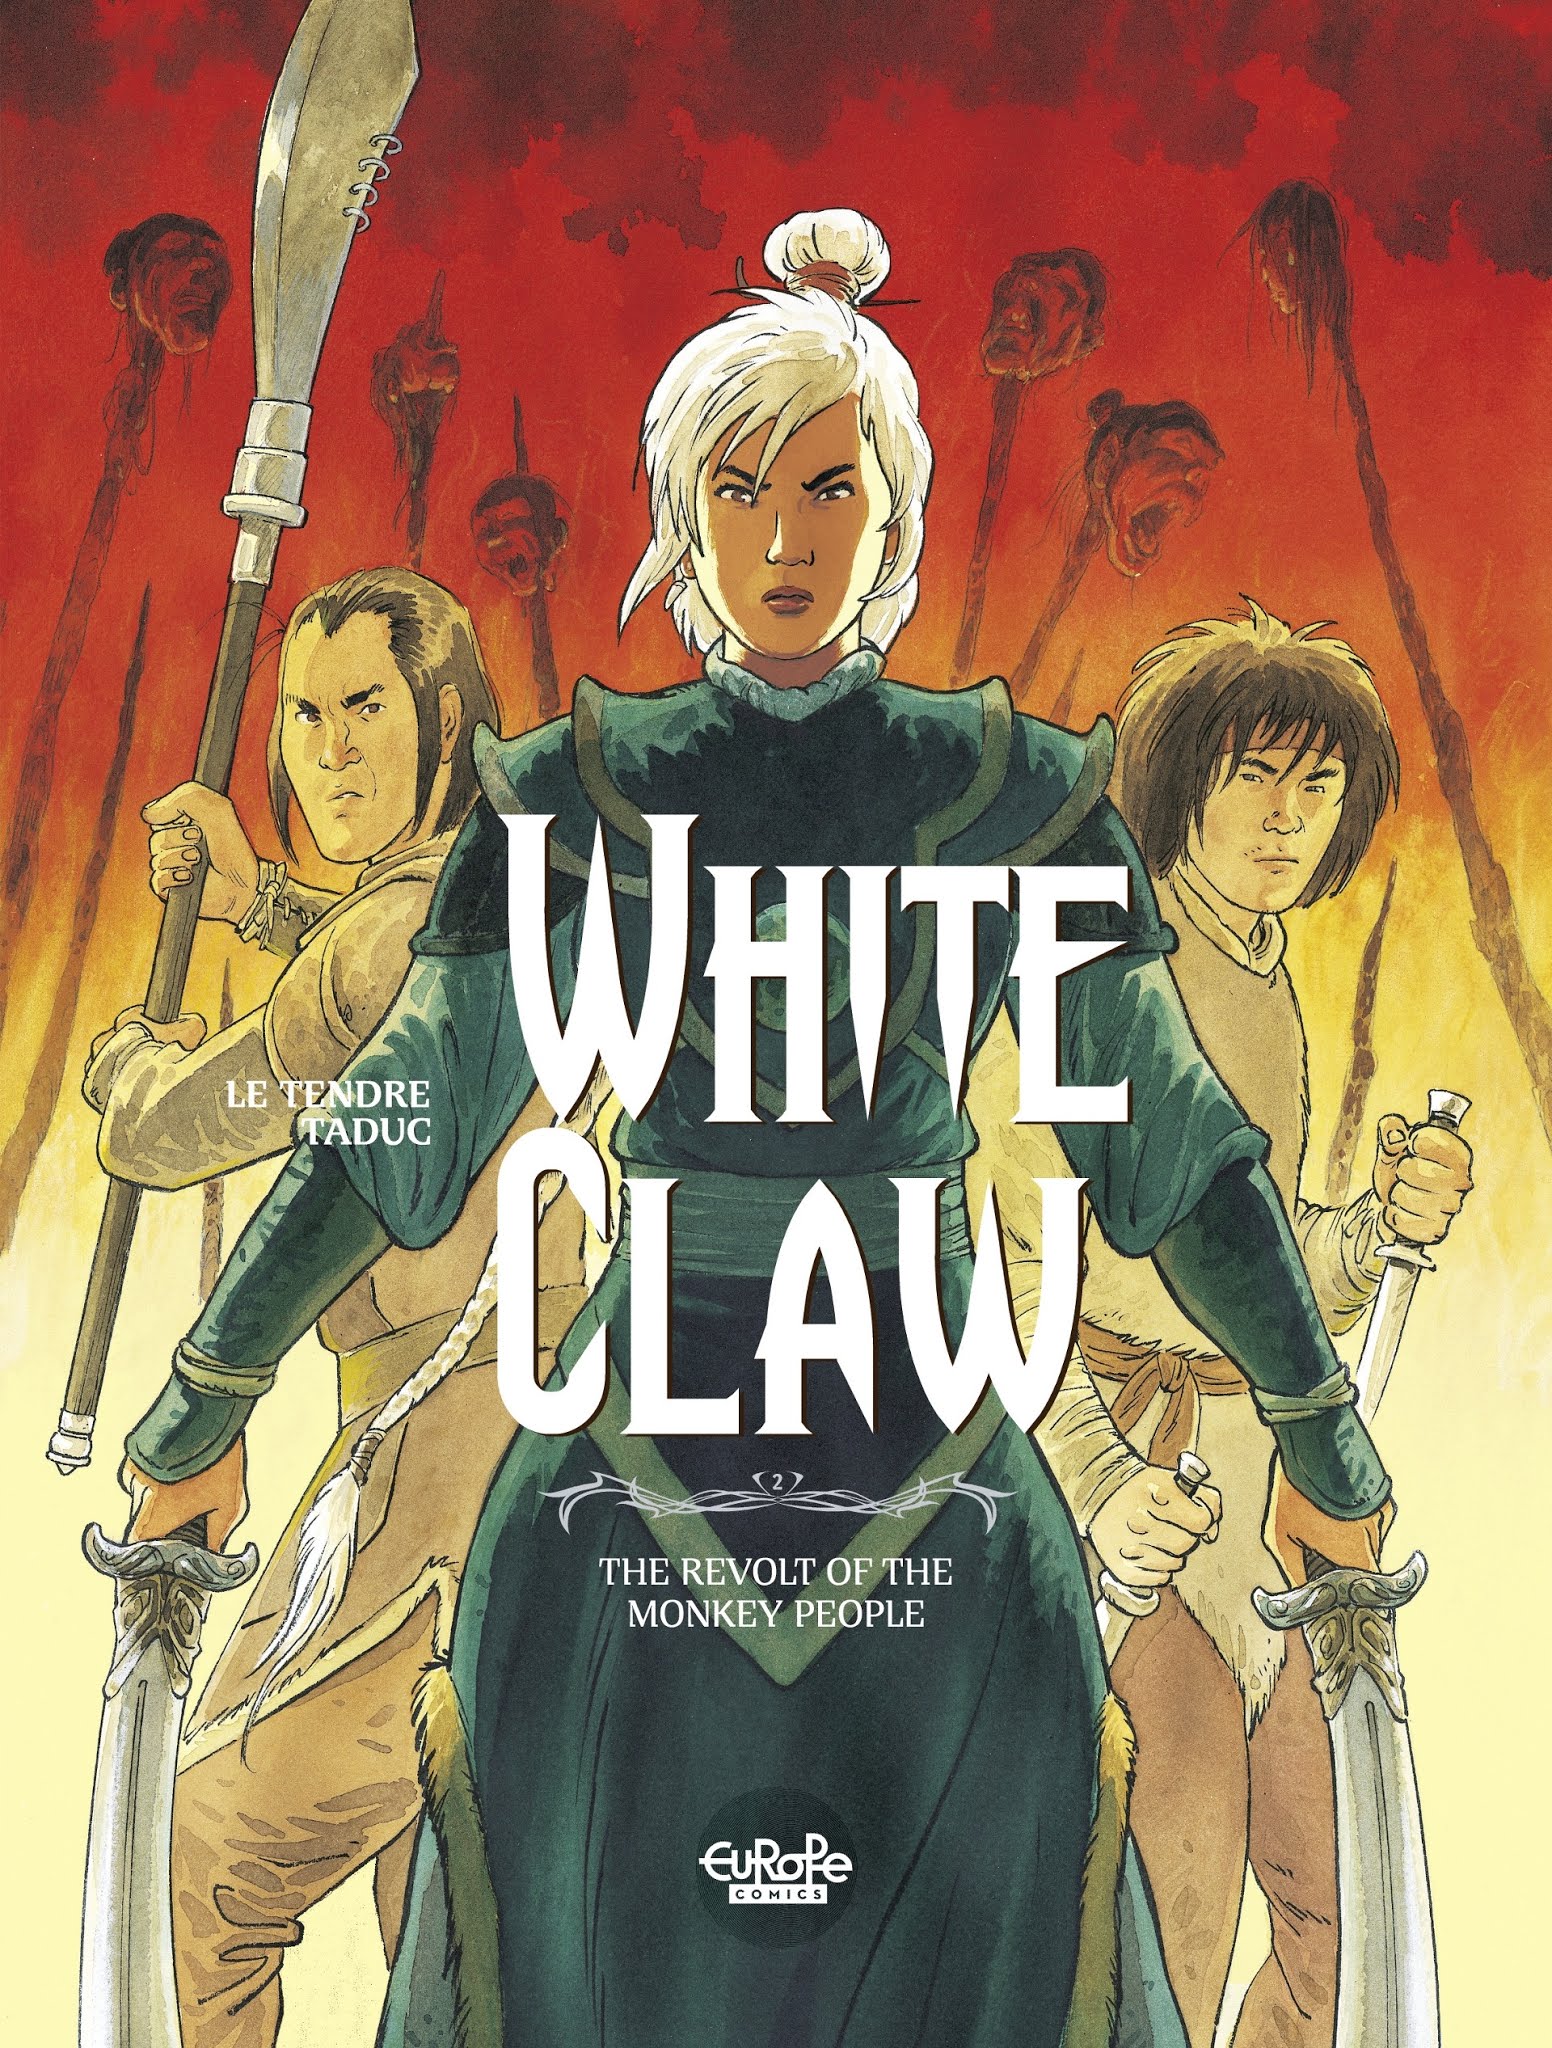 Read online White Claw comic -  Issue #2 - 1